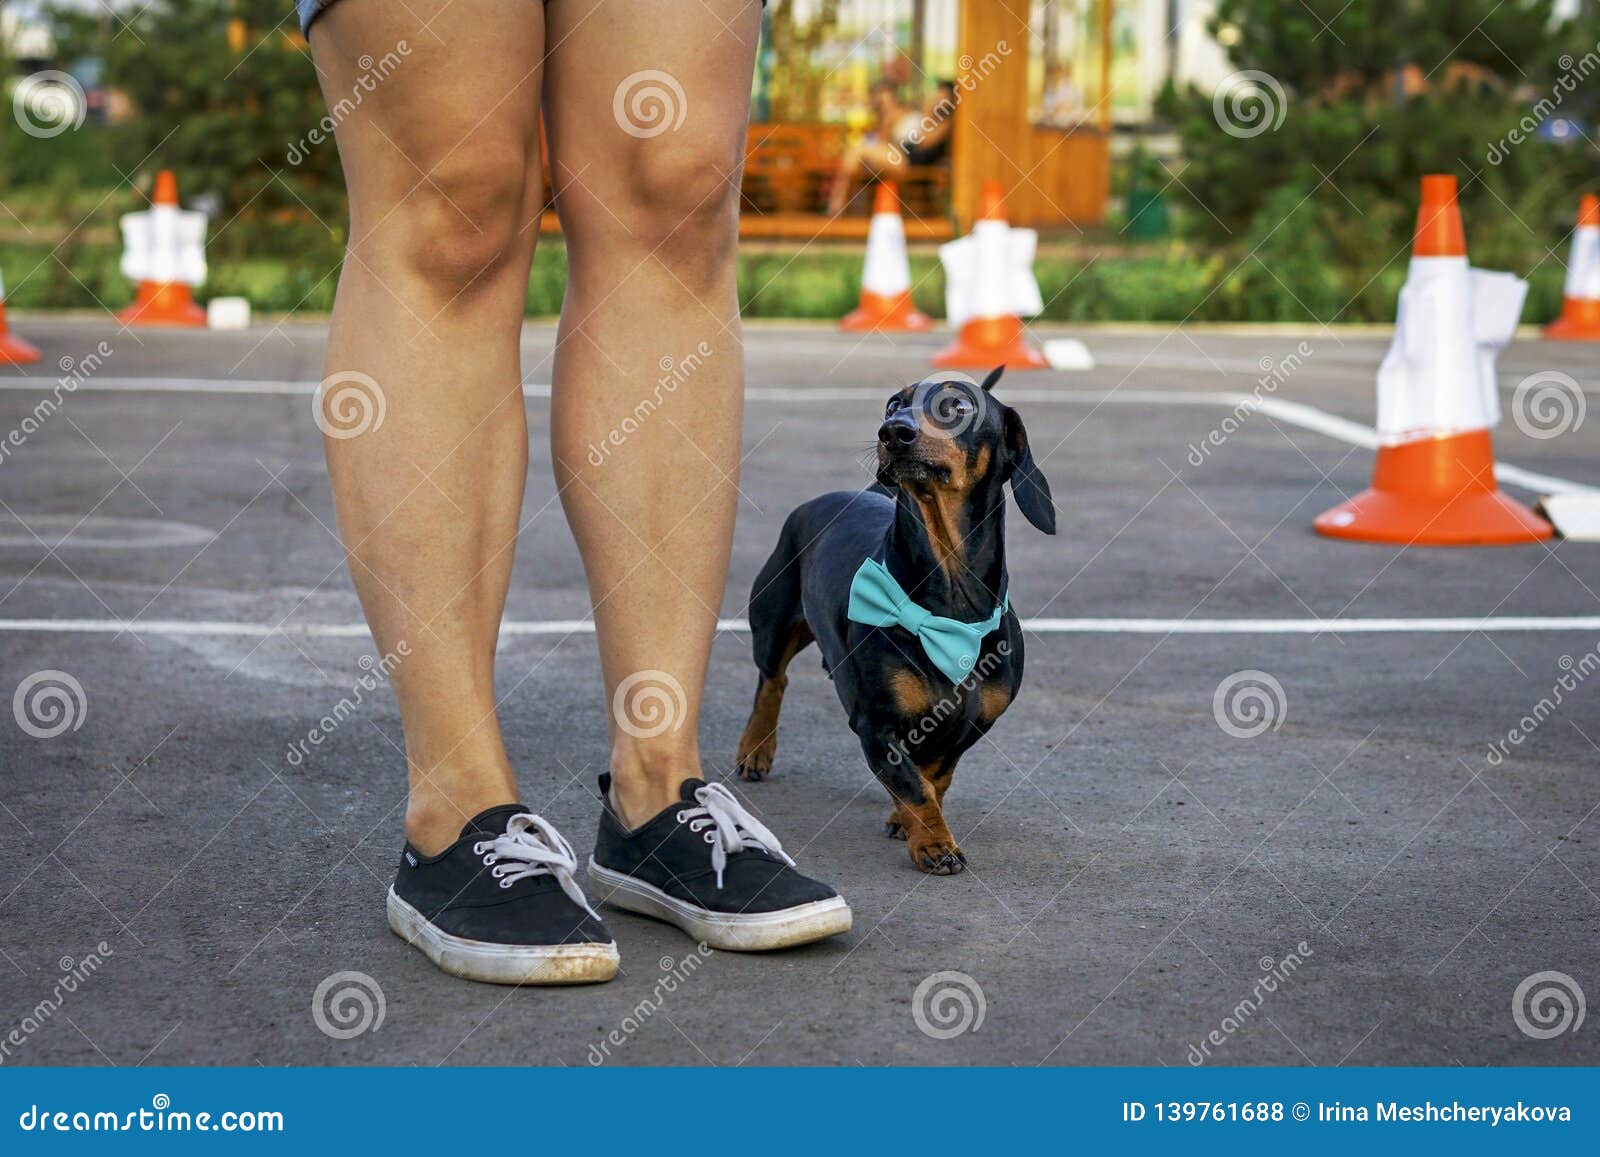 Dog Dachshund Breed, Black And Tan, With The Trainer At